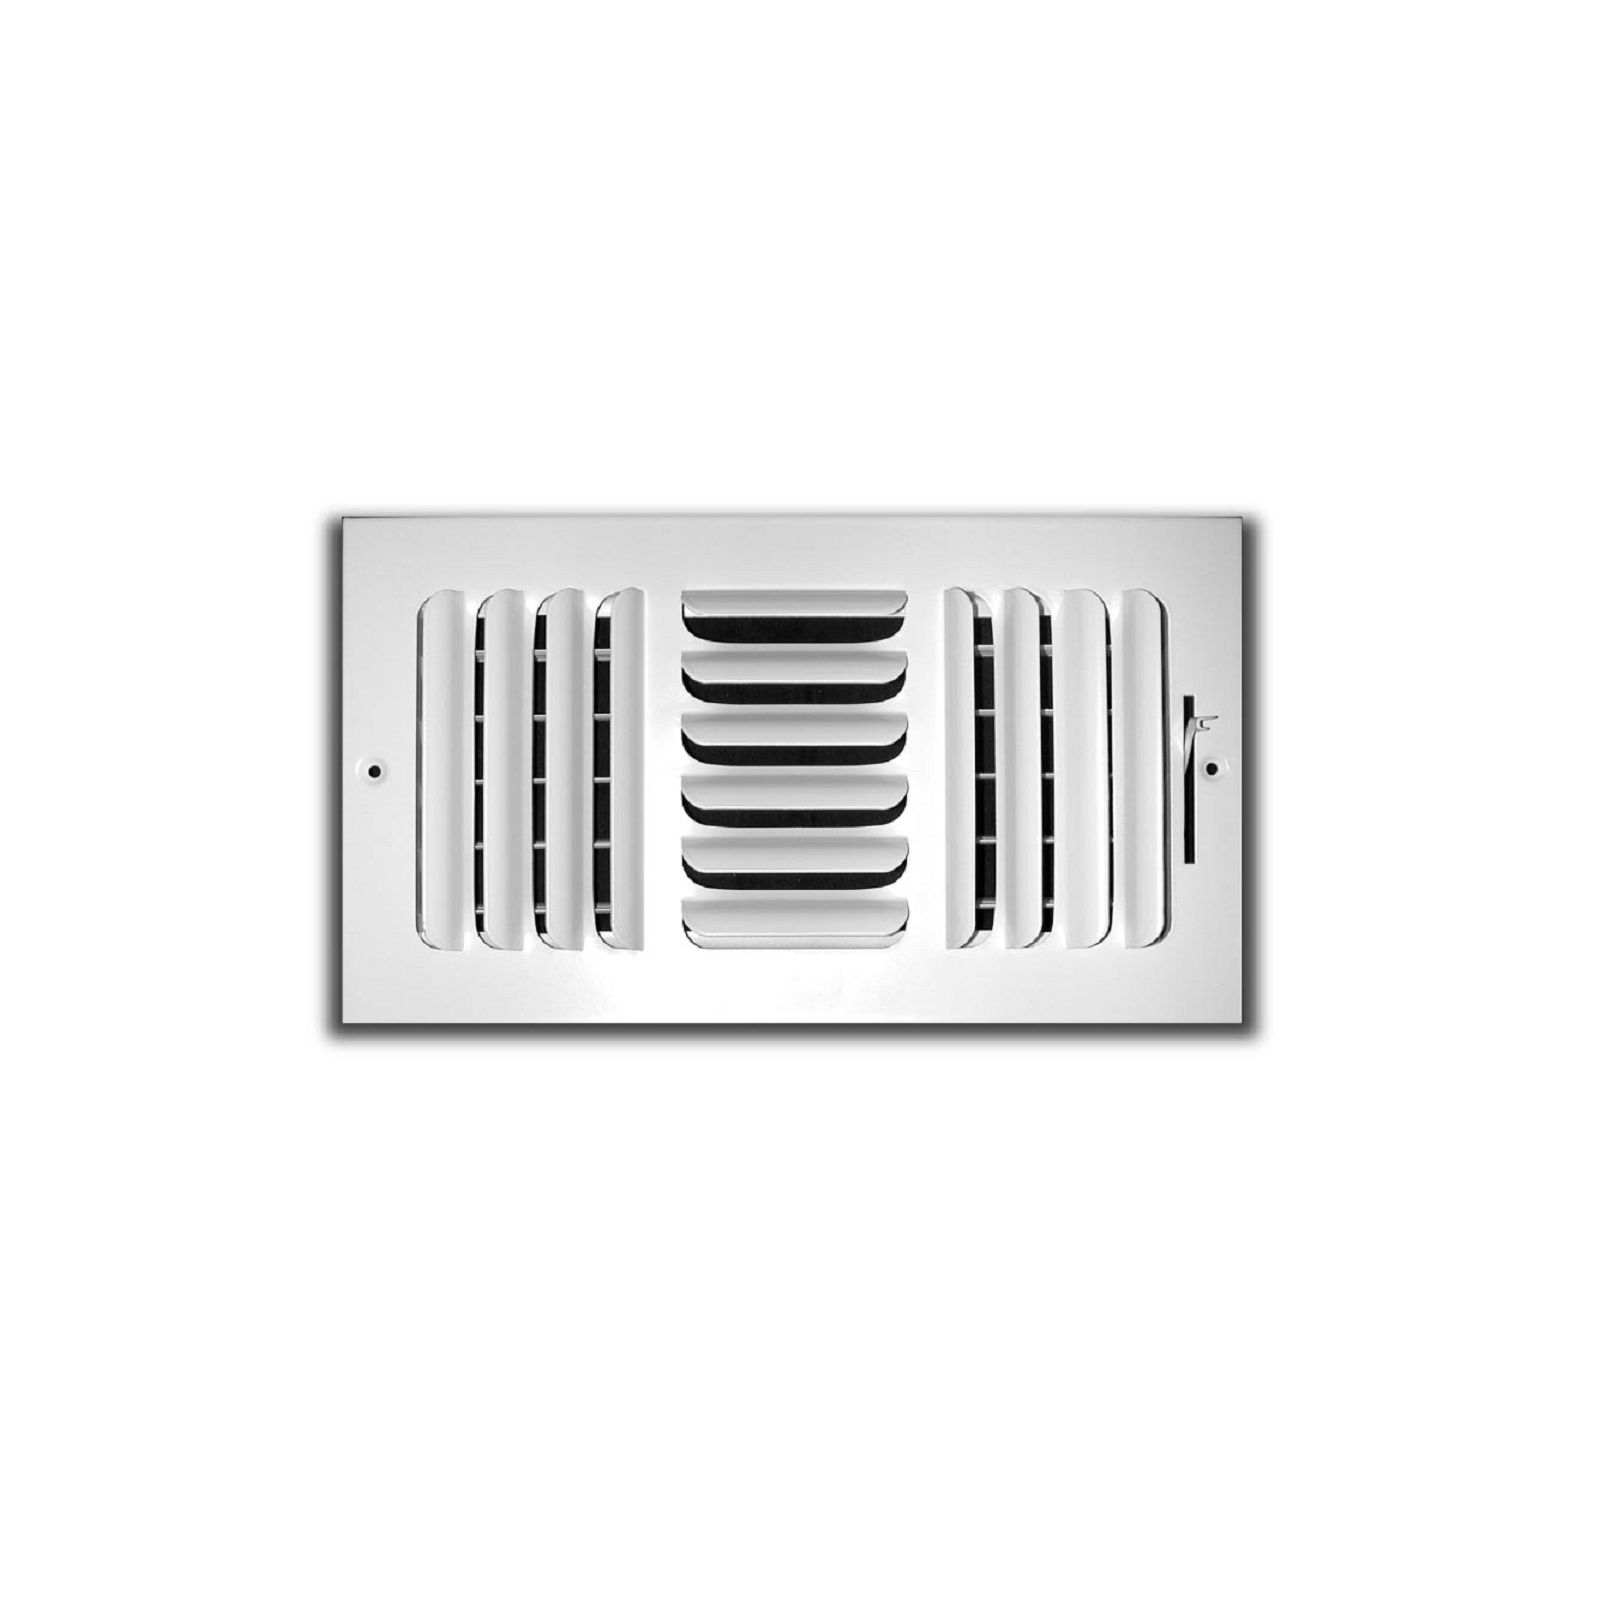 TRUaire 403M 06X06 - Fixed Curved Blade Wall/Ceiling Register With Multi Shutter Damper, 3-Way, White, 06" X 06"